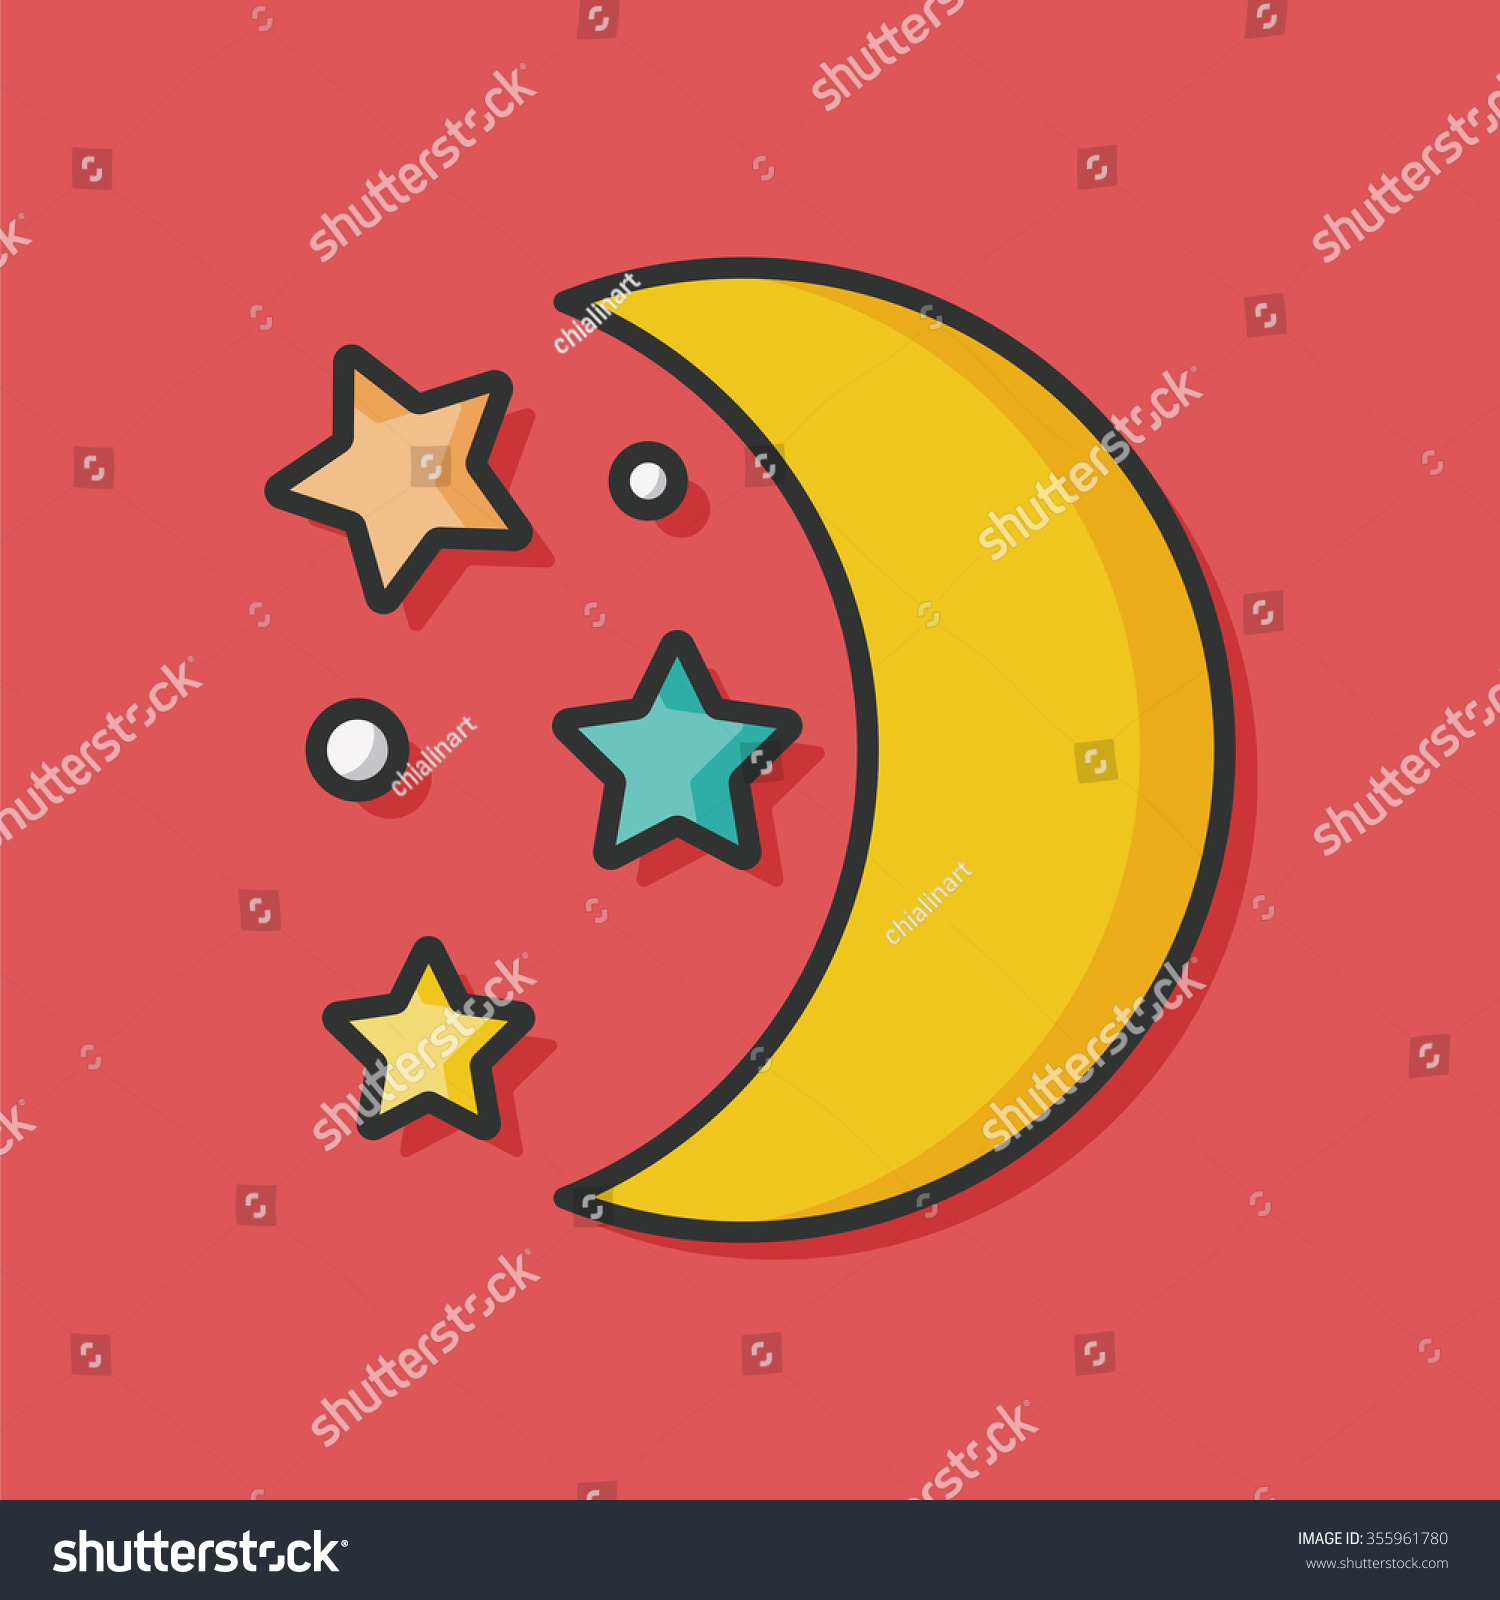 Star And Moon Vector Icon - 355961780 : Shutterstock